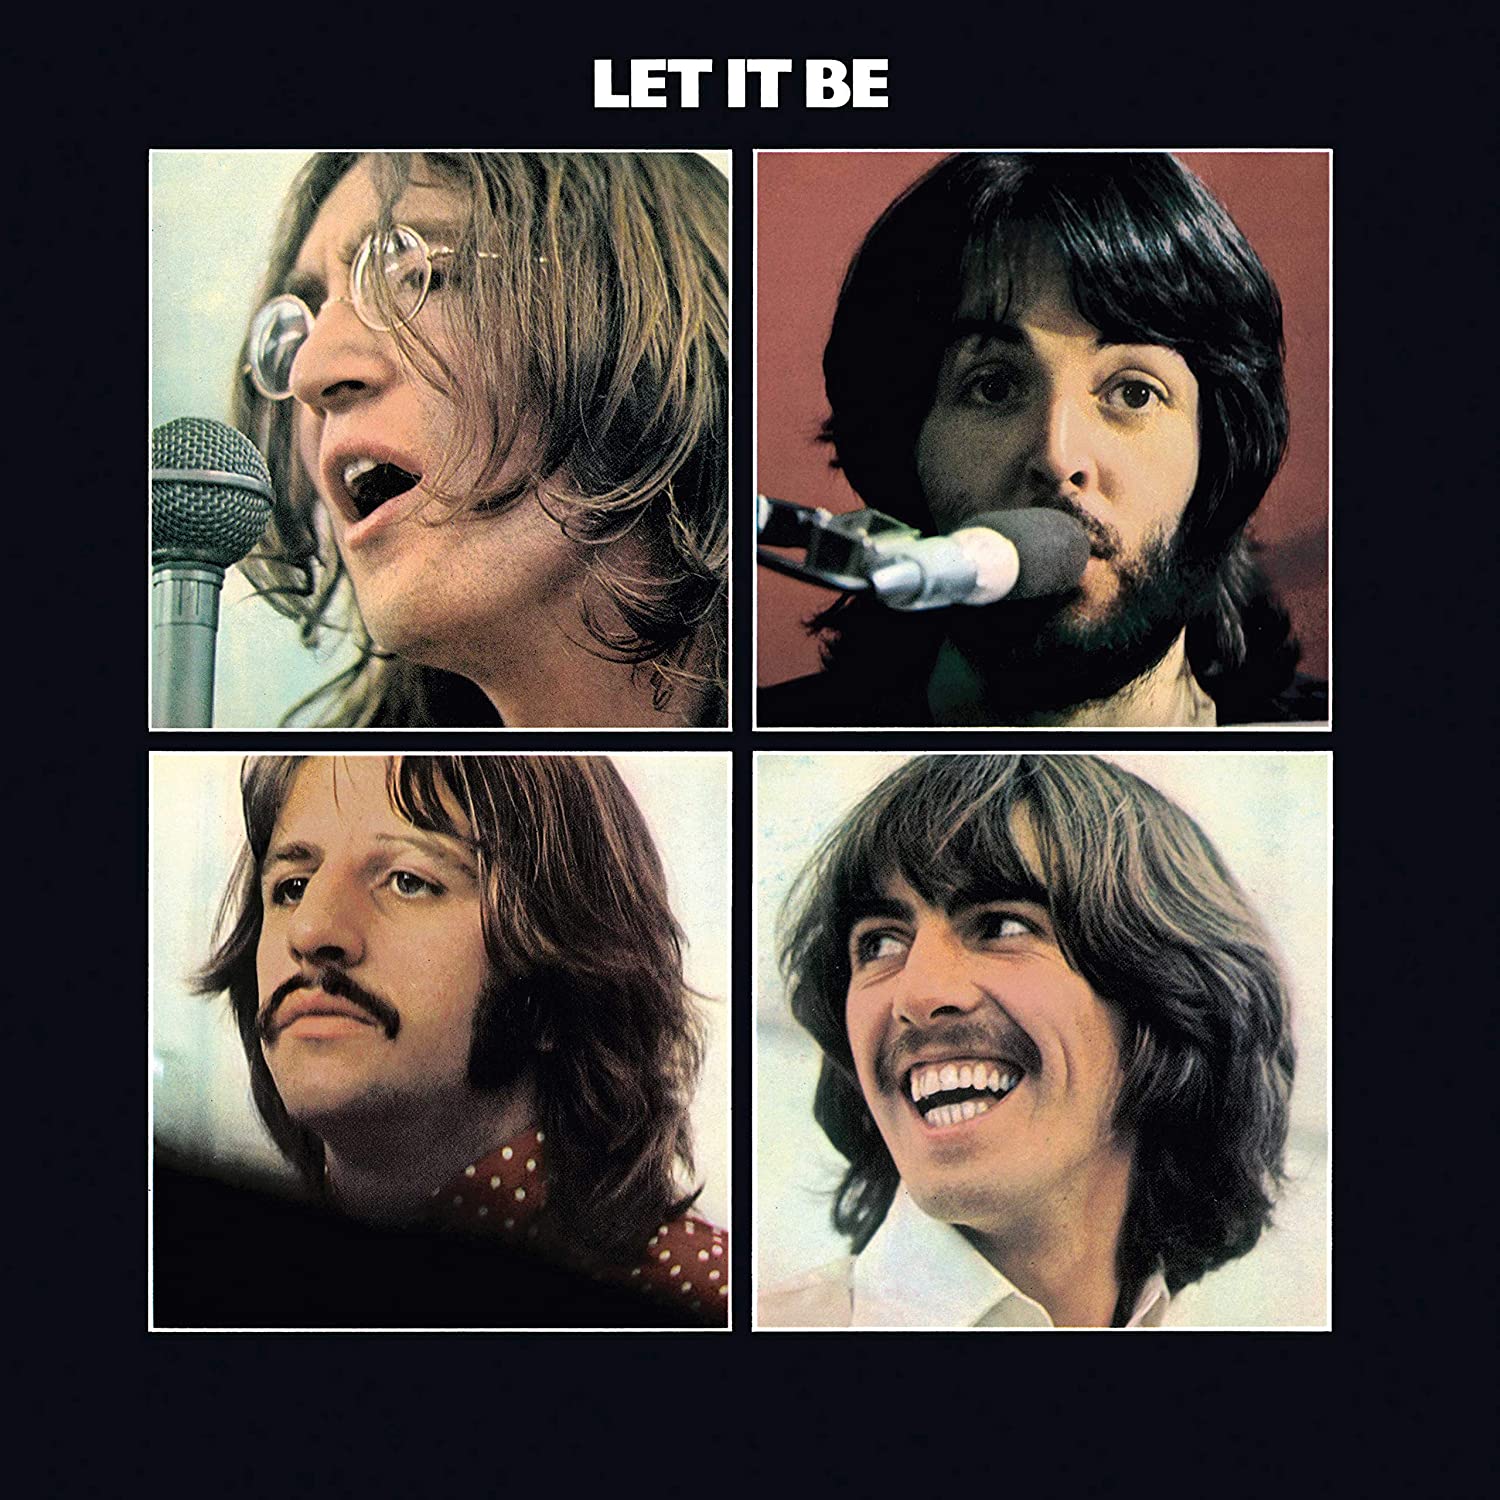 LET IT BE by THE BEATLES